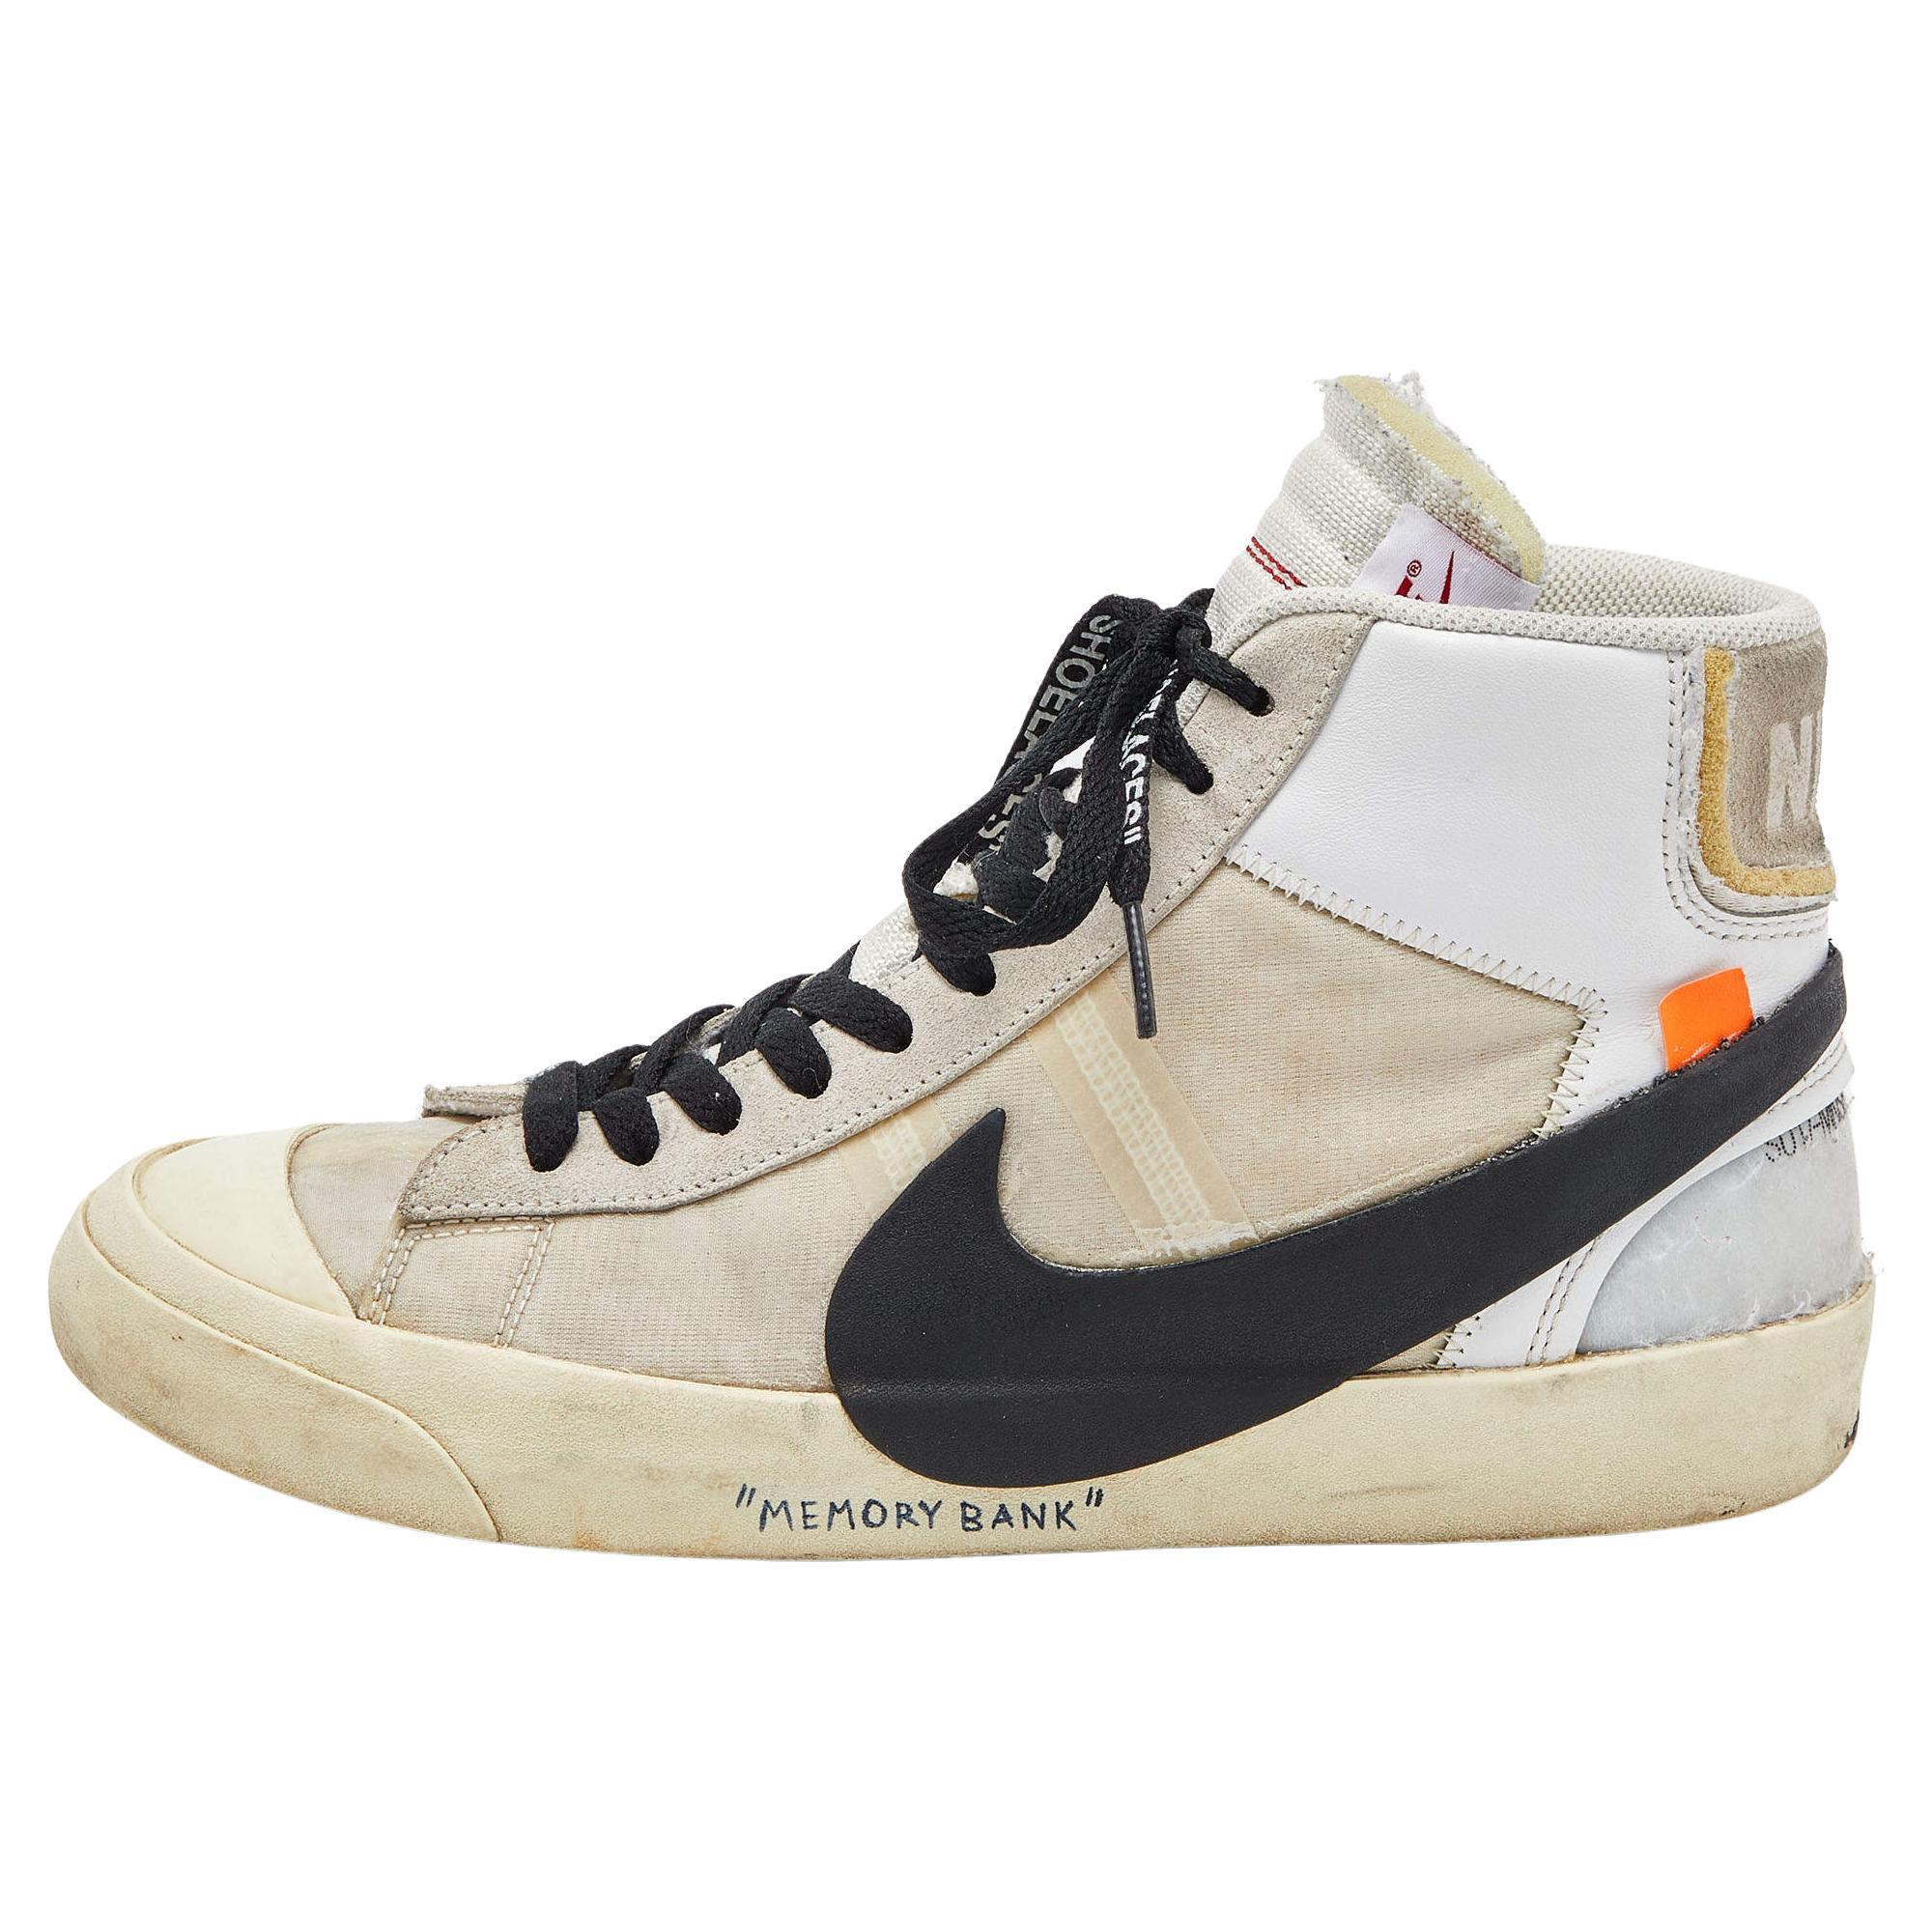 Off-White x Nike Suede, Mesh and Leather Mid Blazer Lace Up Sneakers Size 41